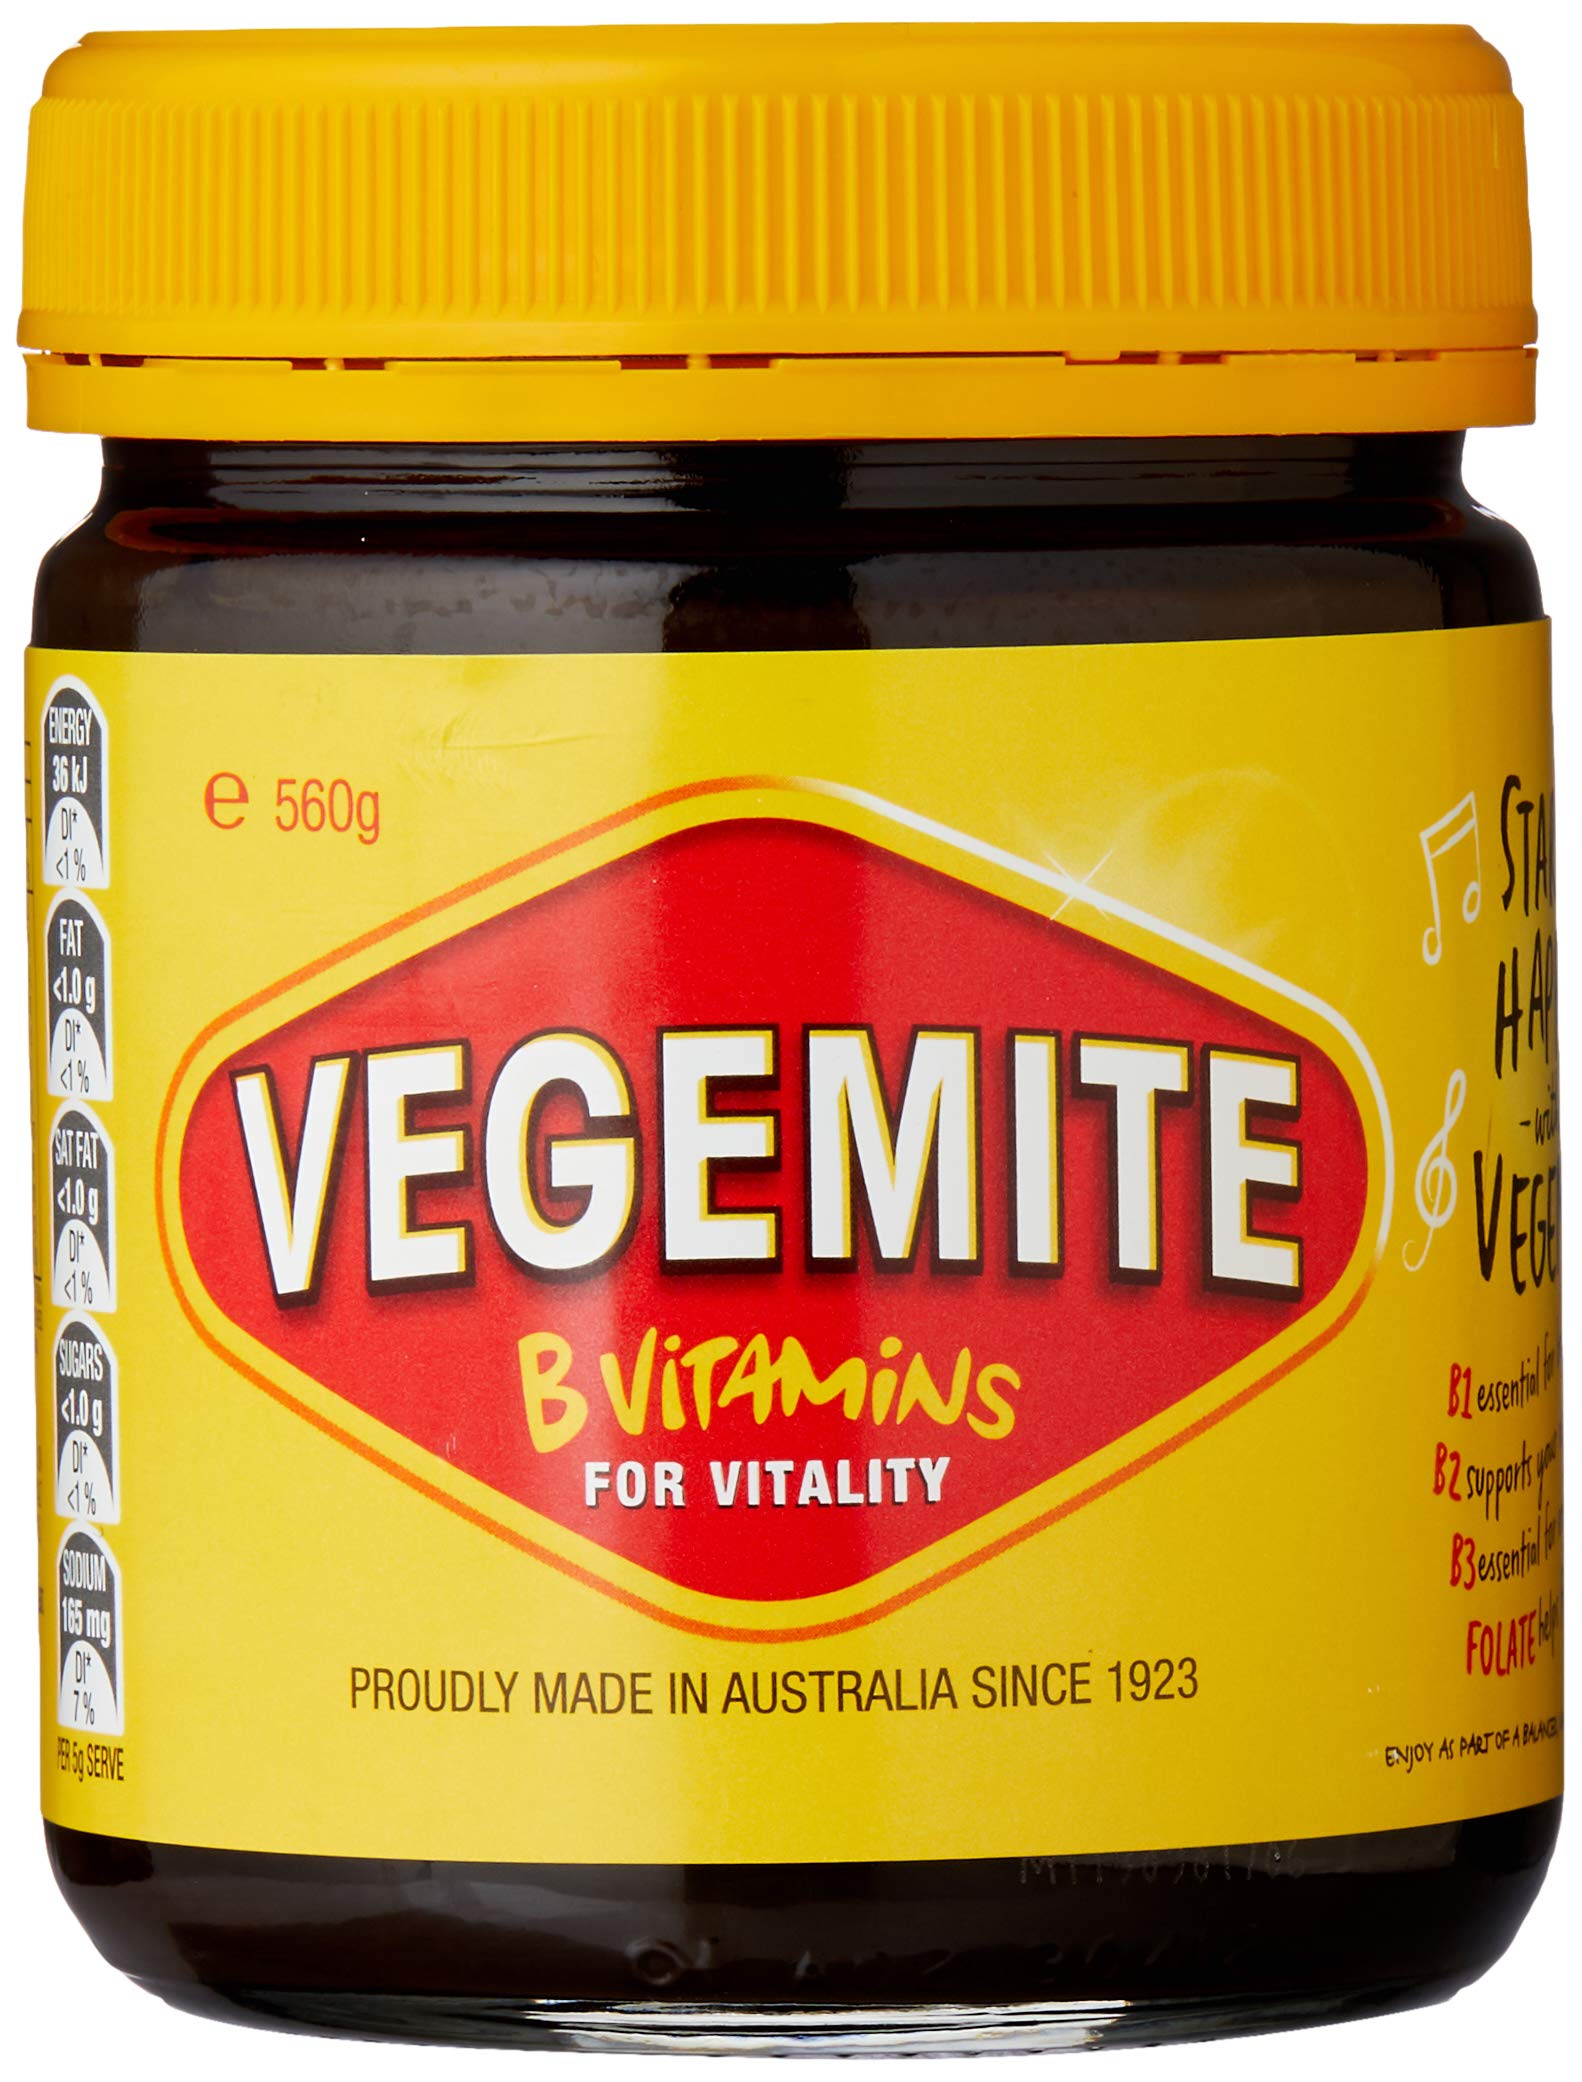 what is vegemite made of